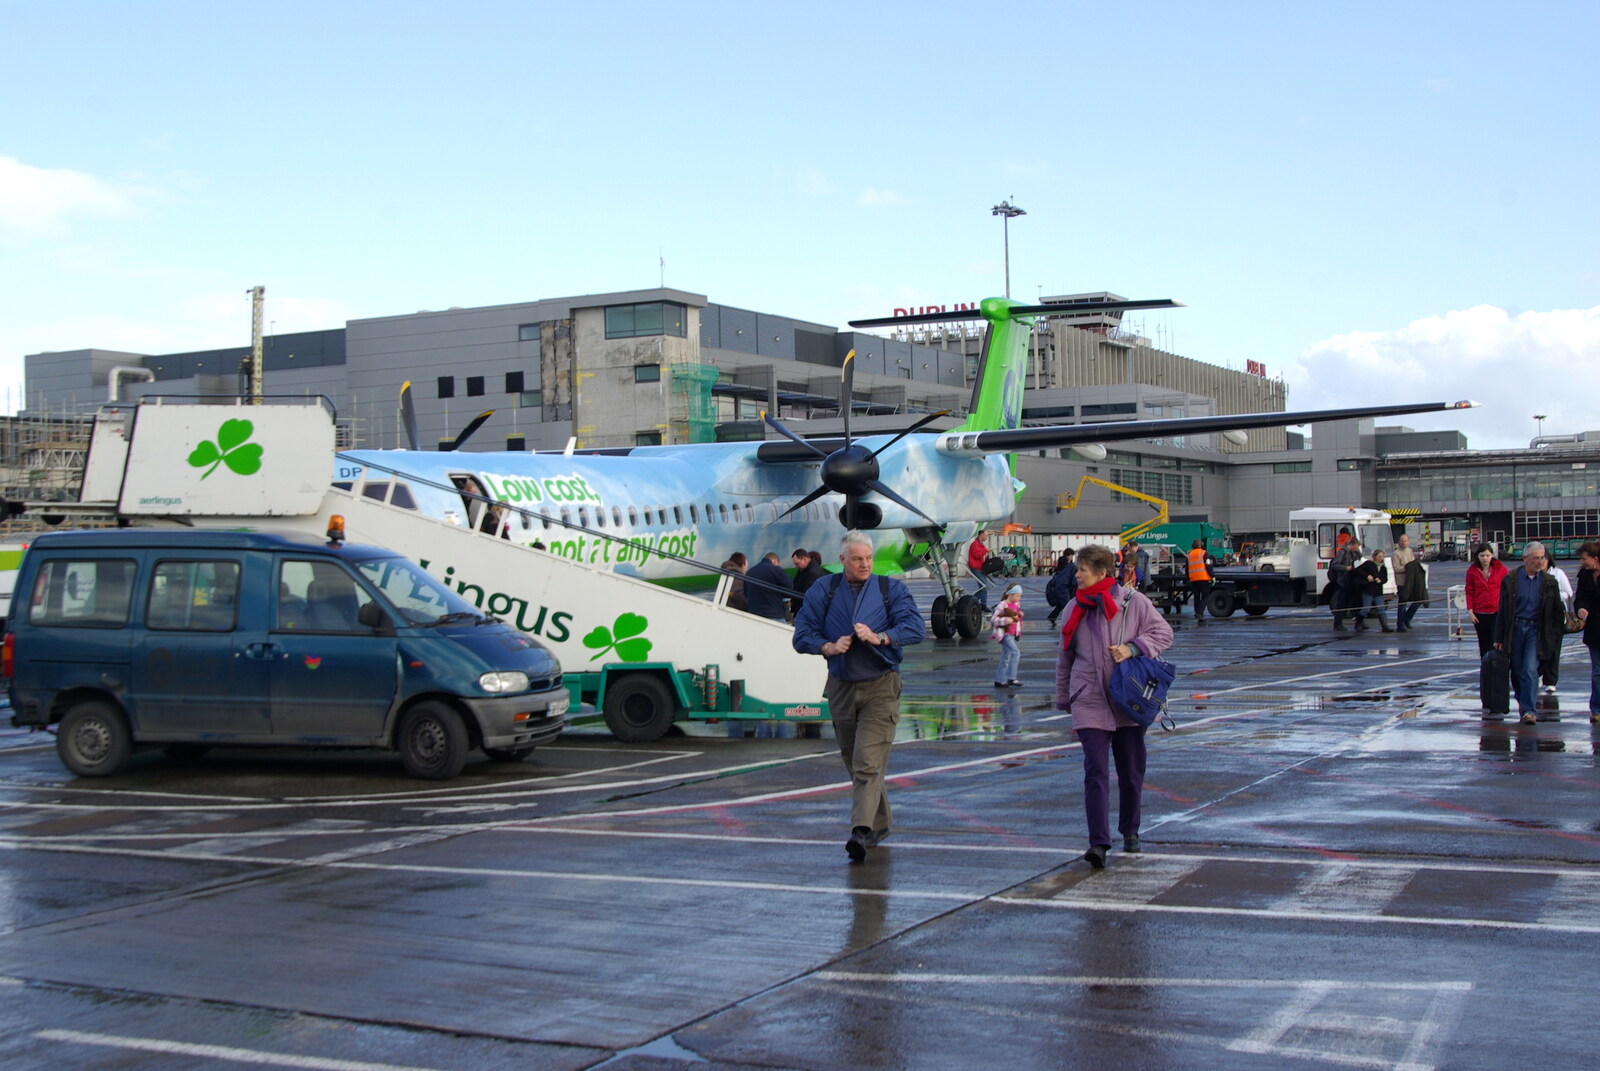 Easter in Dublin, Ireland - 21st March 2008: The plane disembarks on a cold and wet apron